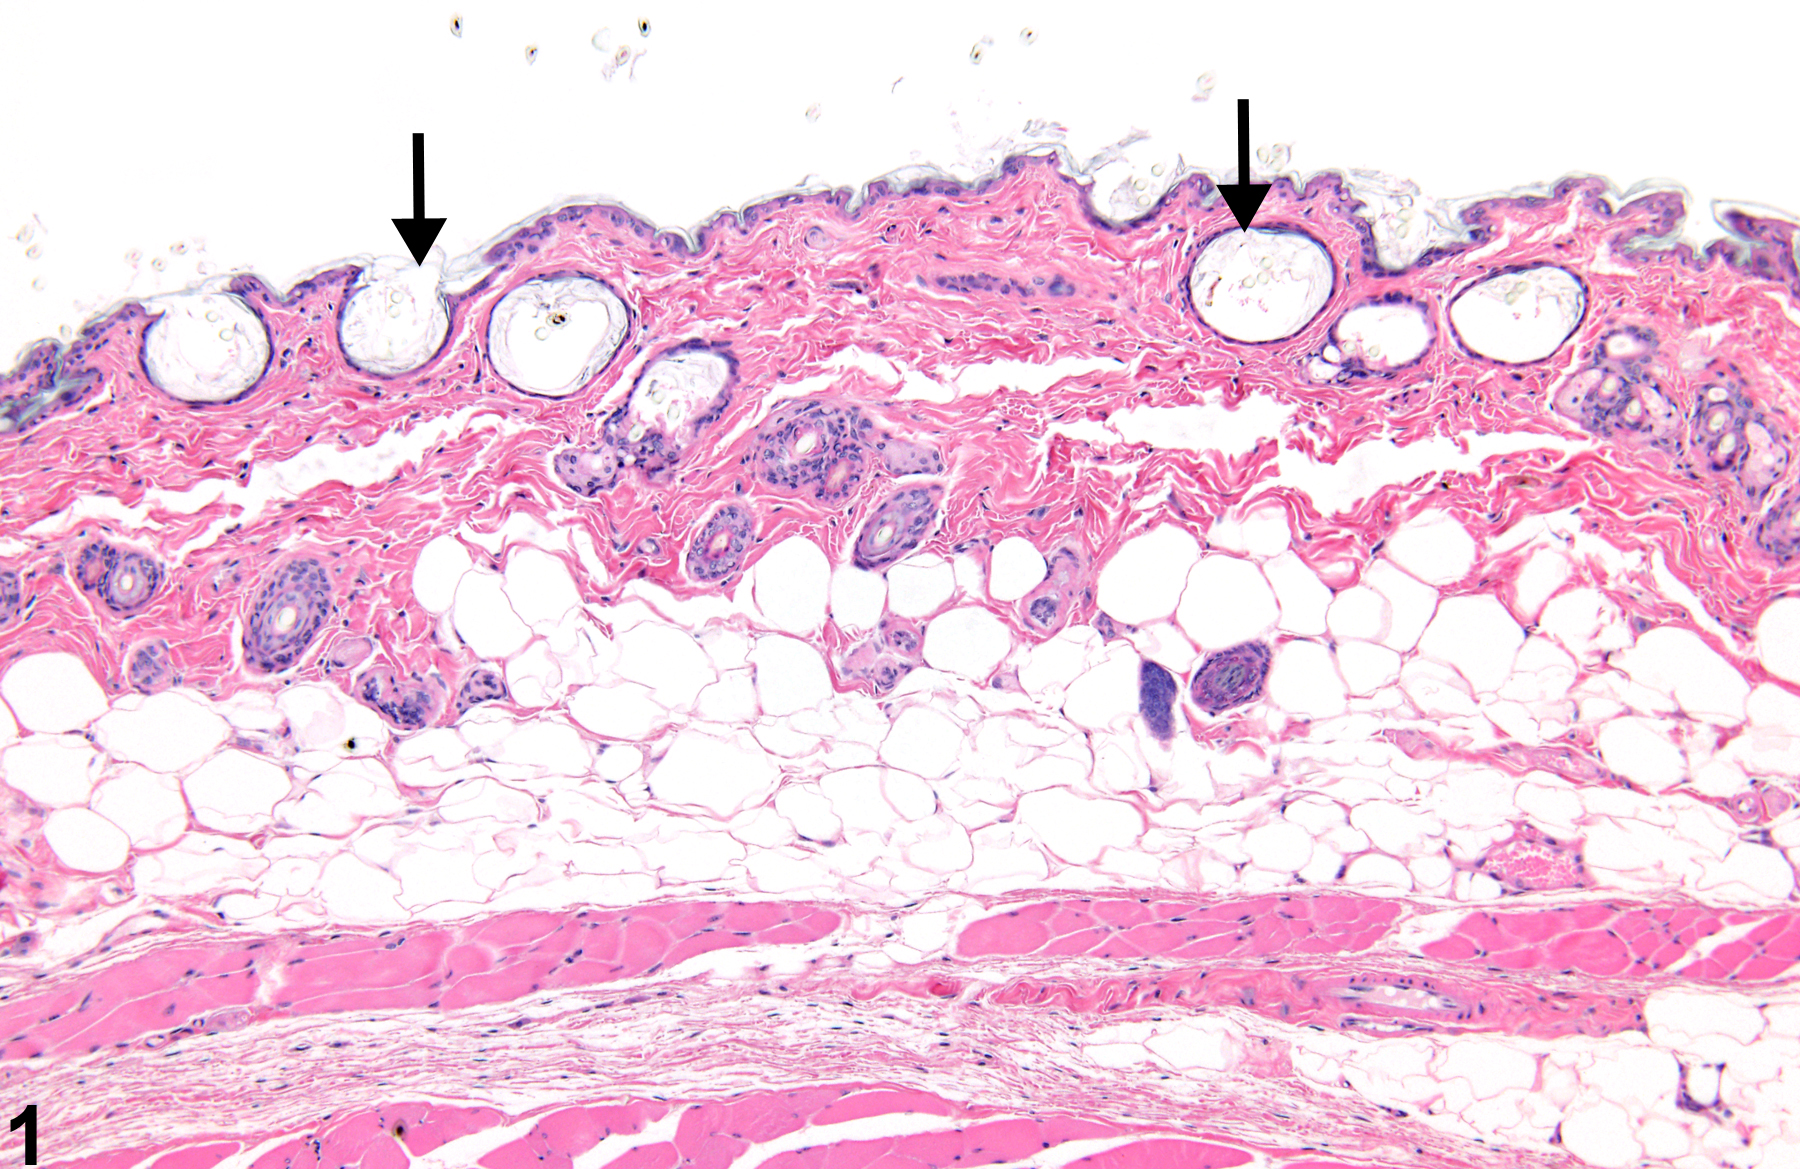 Image of dilatation in the skin follicle from a male B6C3F1 mouse in a chronic study